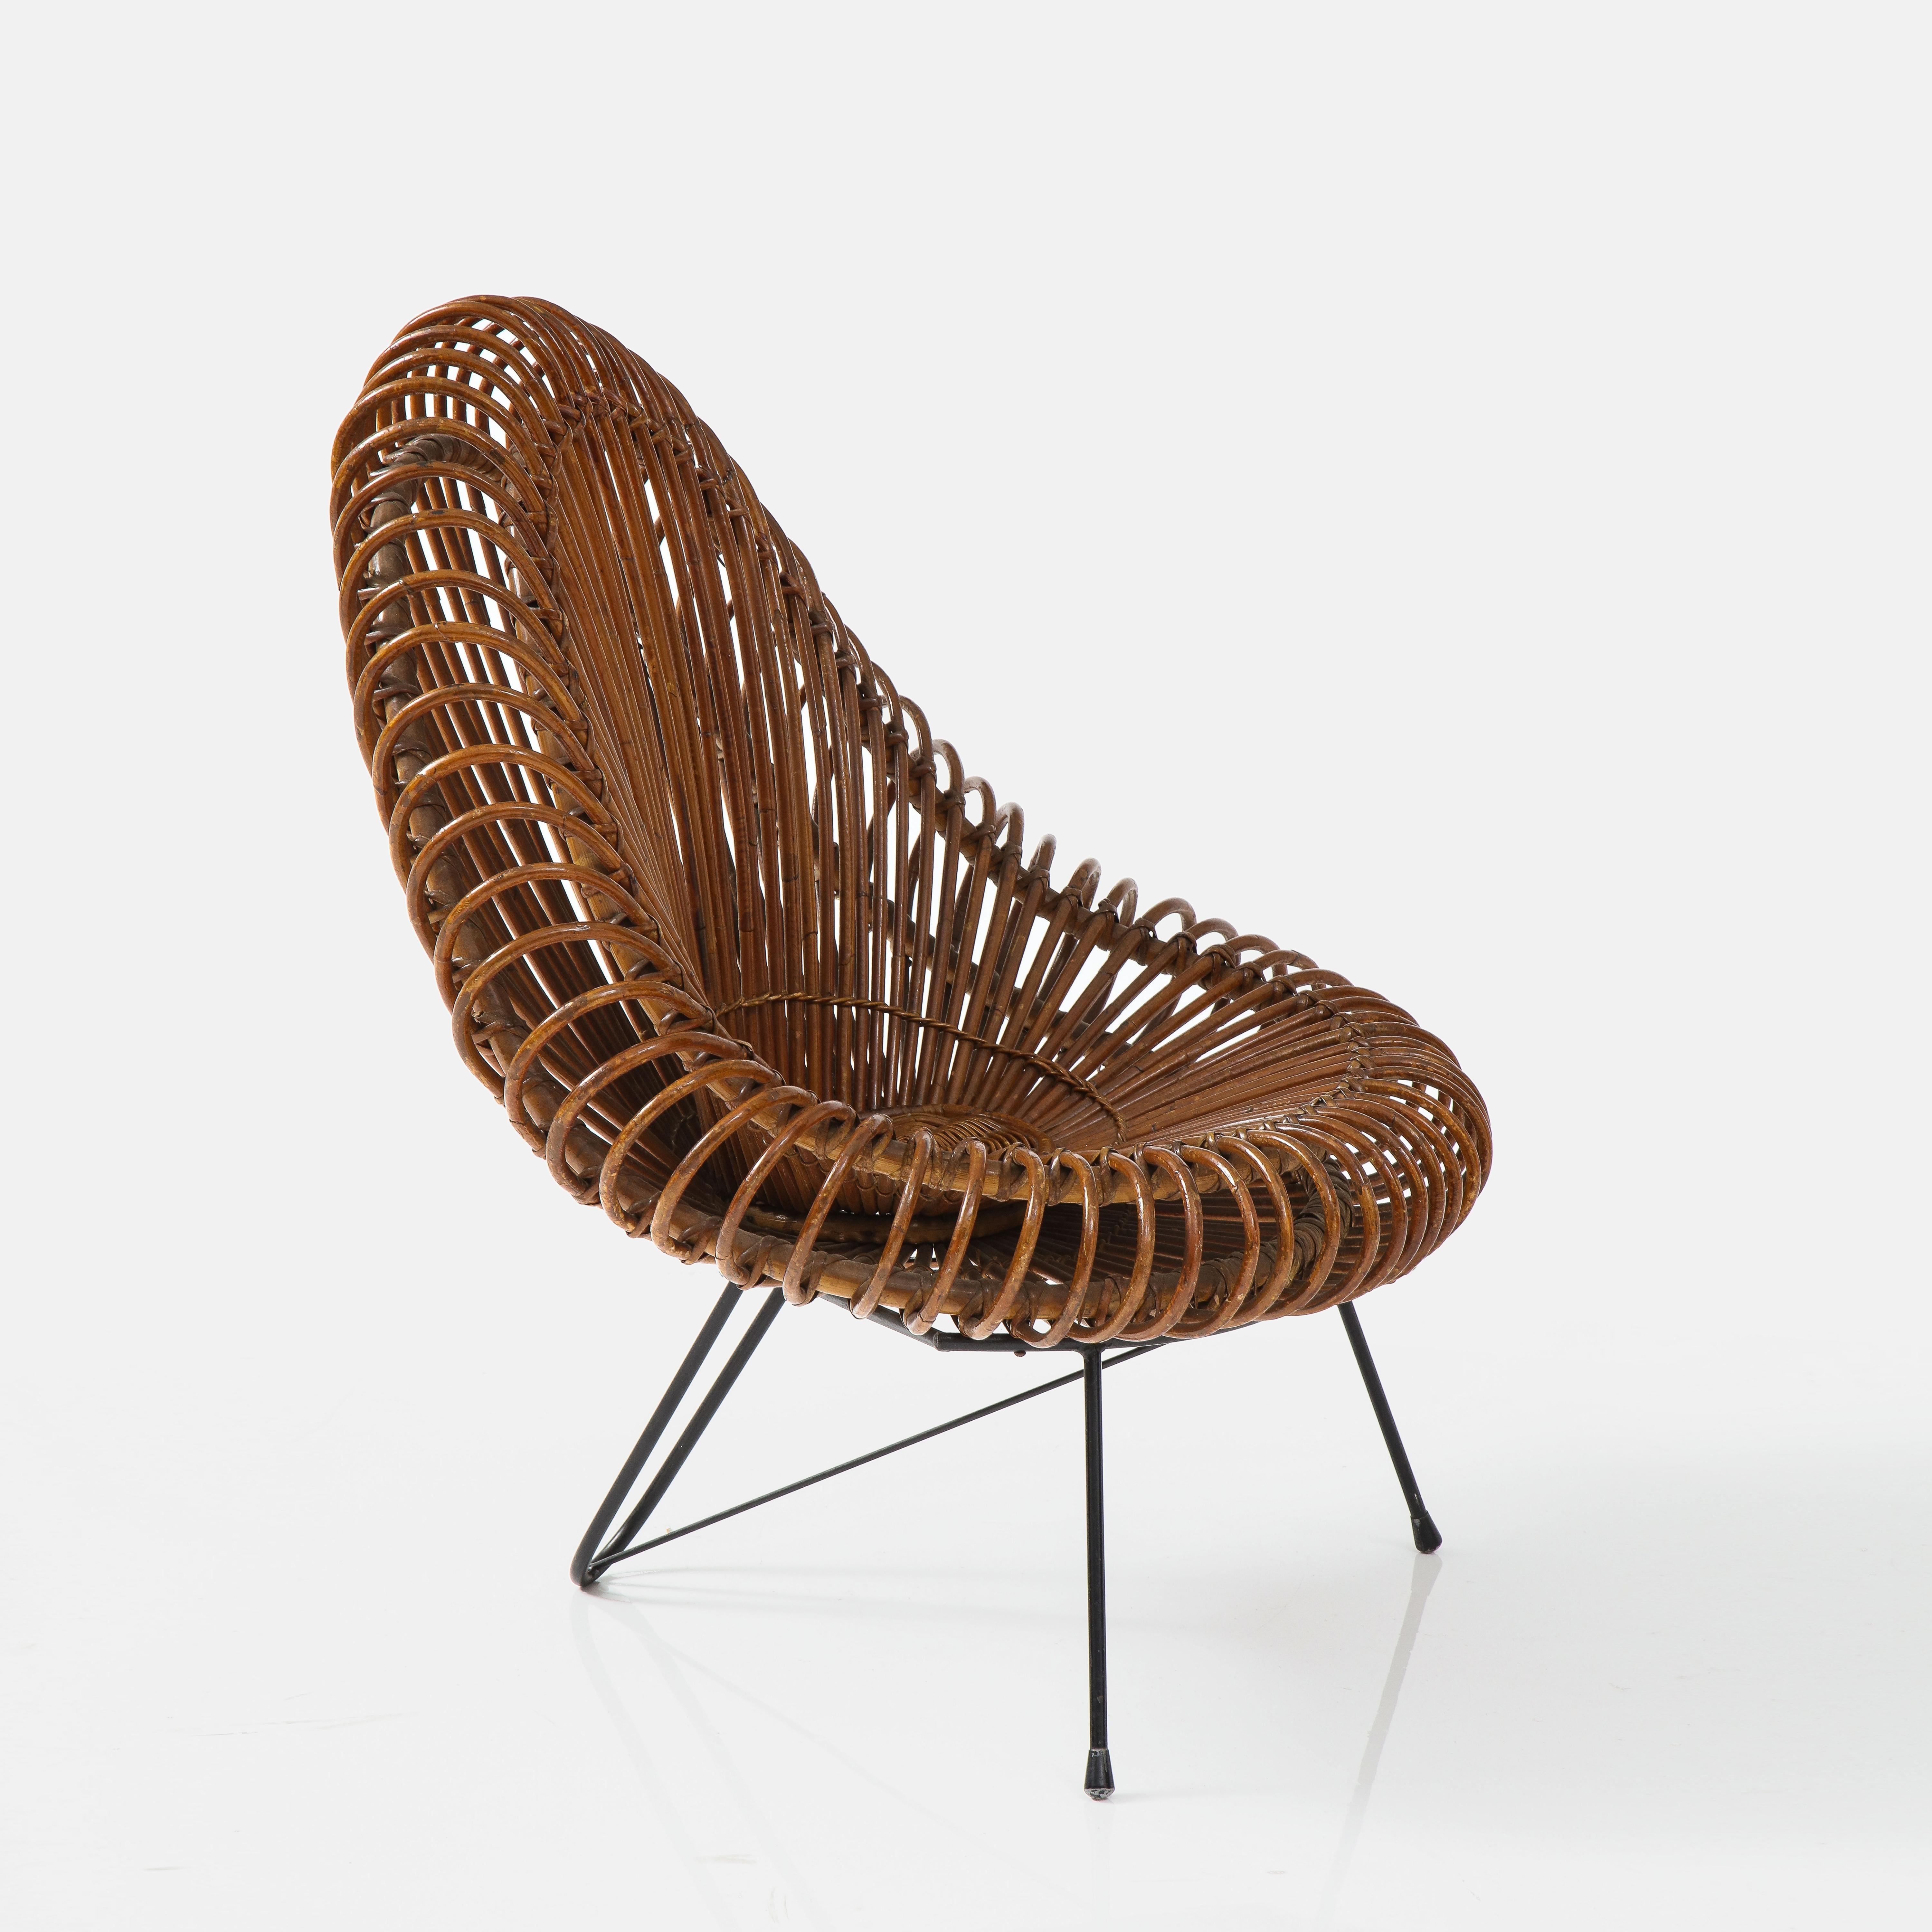 French Janine Abraham and Dirk Jan Rol Sculptural Rattan Lounge Chair, France, 1950s For Sale